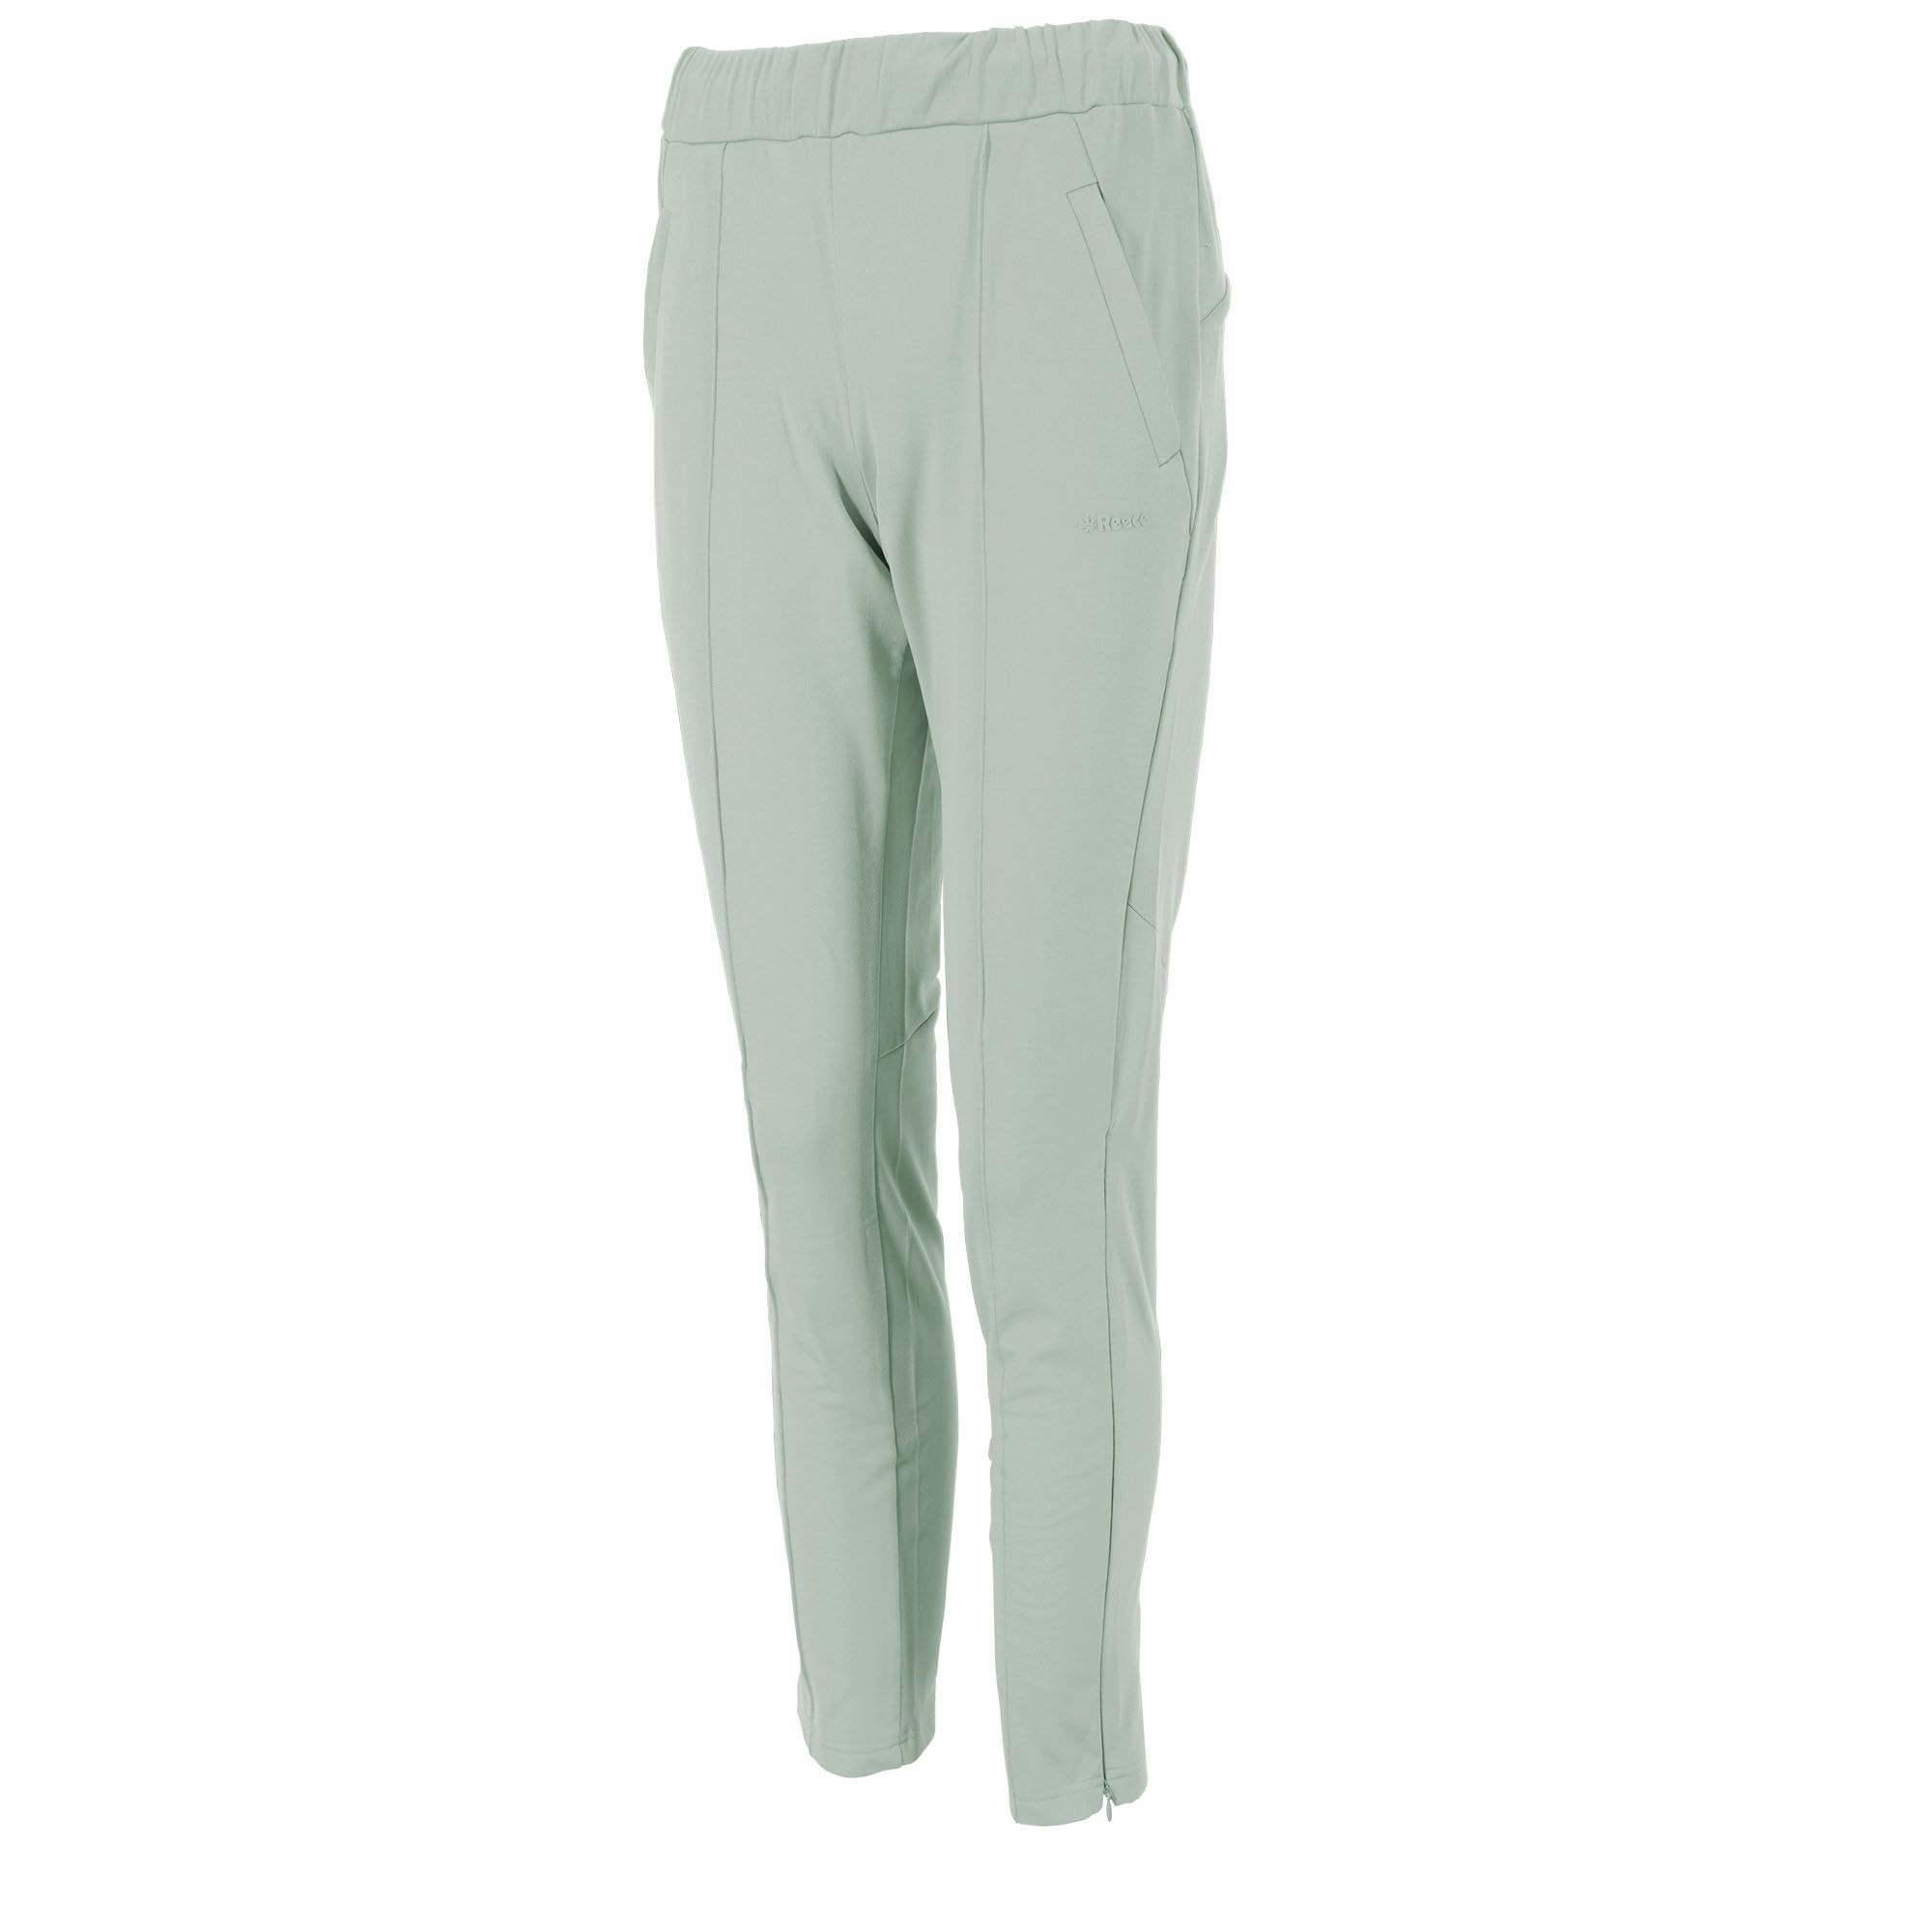 --Reece Cleve Stretched Fit Pants Ladies